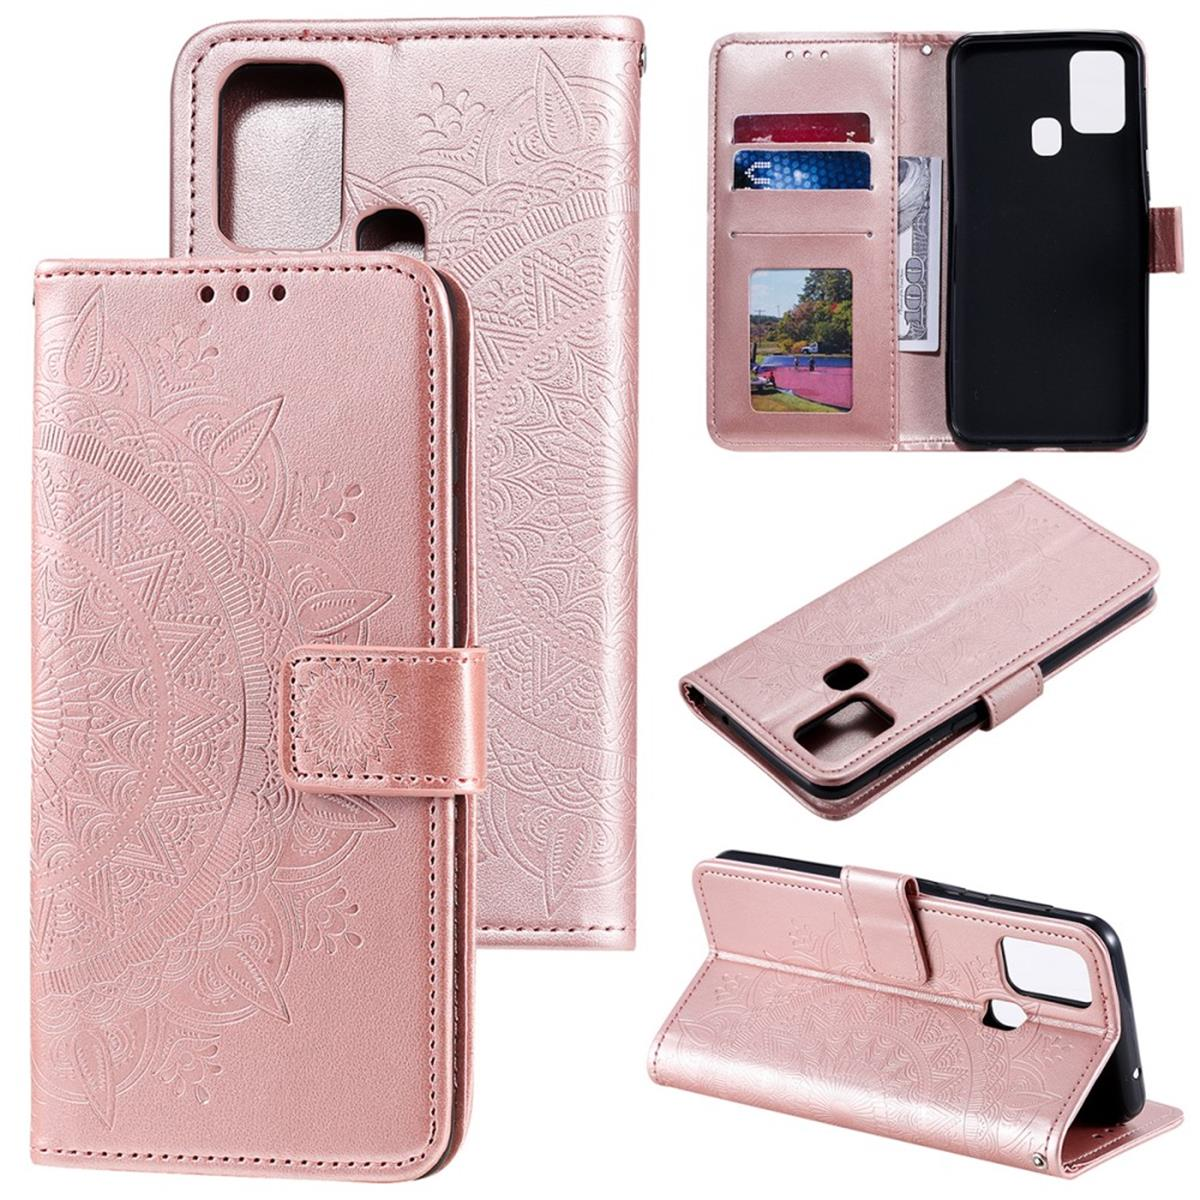 Samsung, Bookcover, A21s, Galaxy Muster, COVERKINGZ Roségold Klapphülle Mandala mit